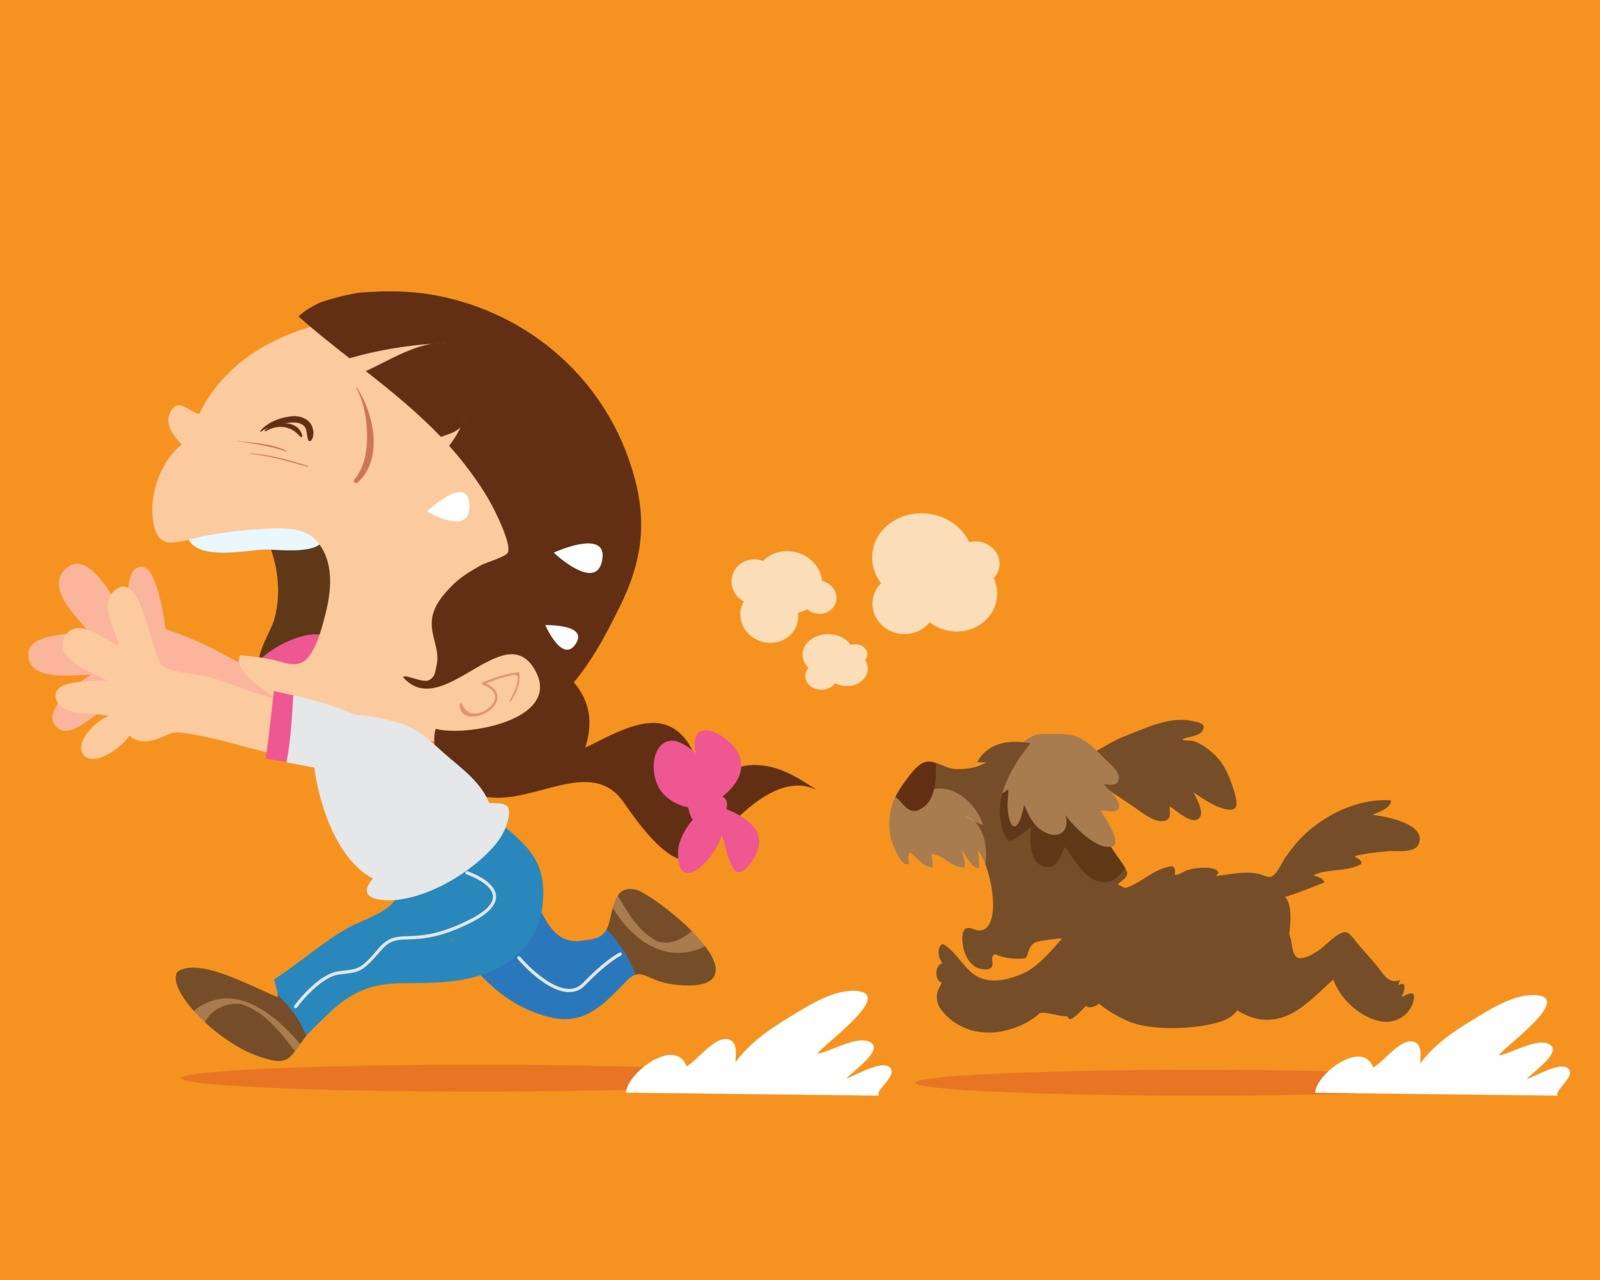 Cute girl running away from angry dog.Dogs chases to bite